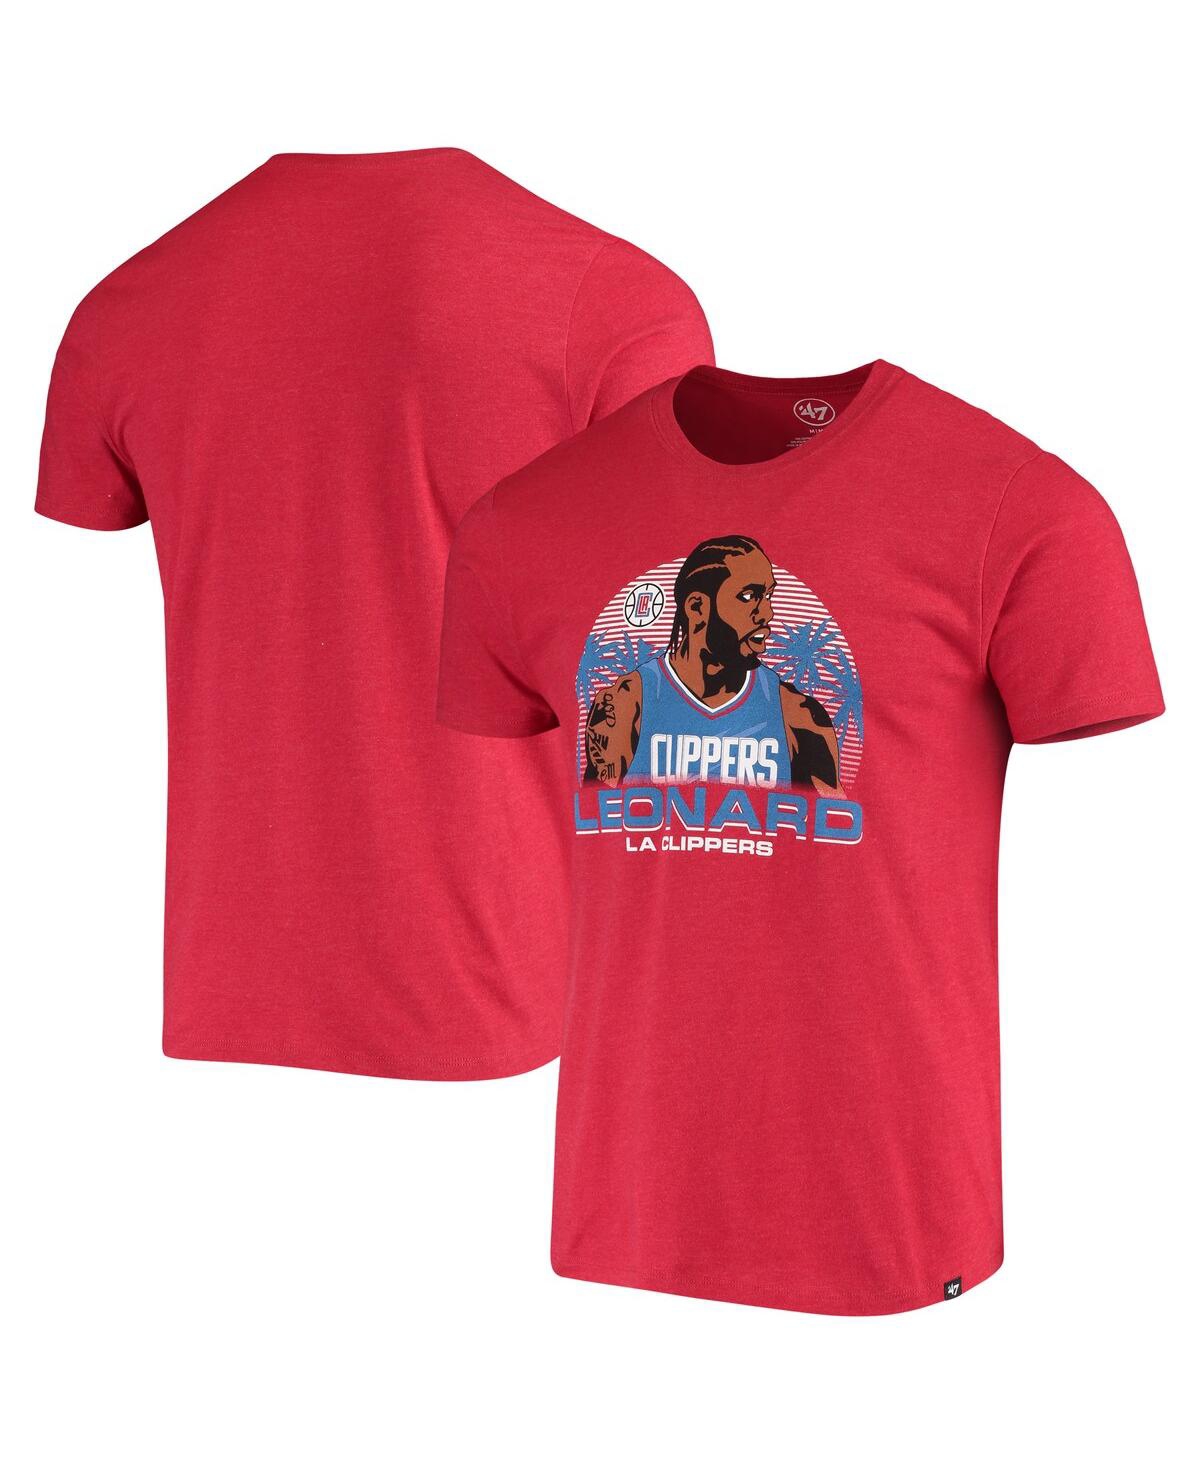 Men's Kawhi Leonard Red La Clippers Player Graphic T-shirt - Red